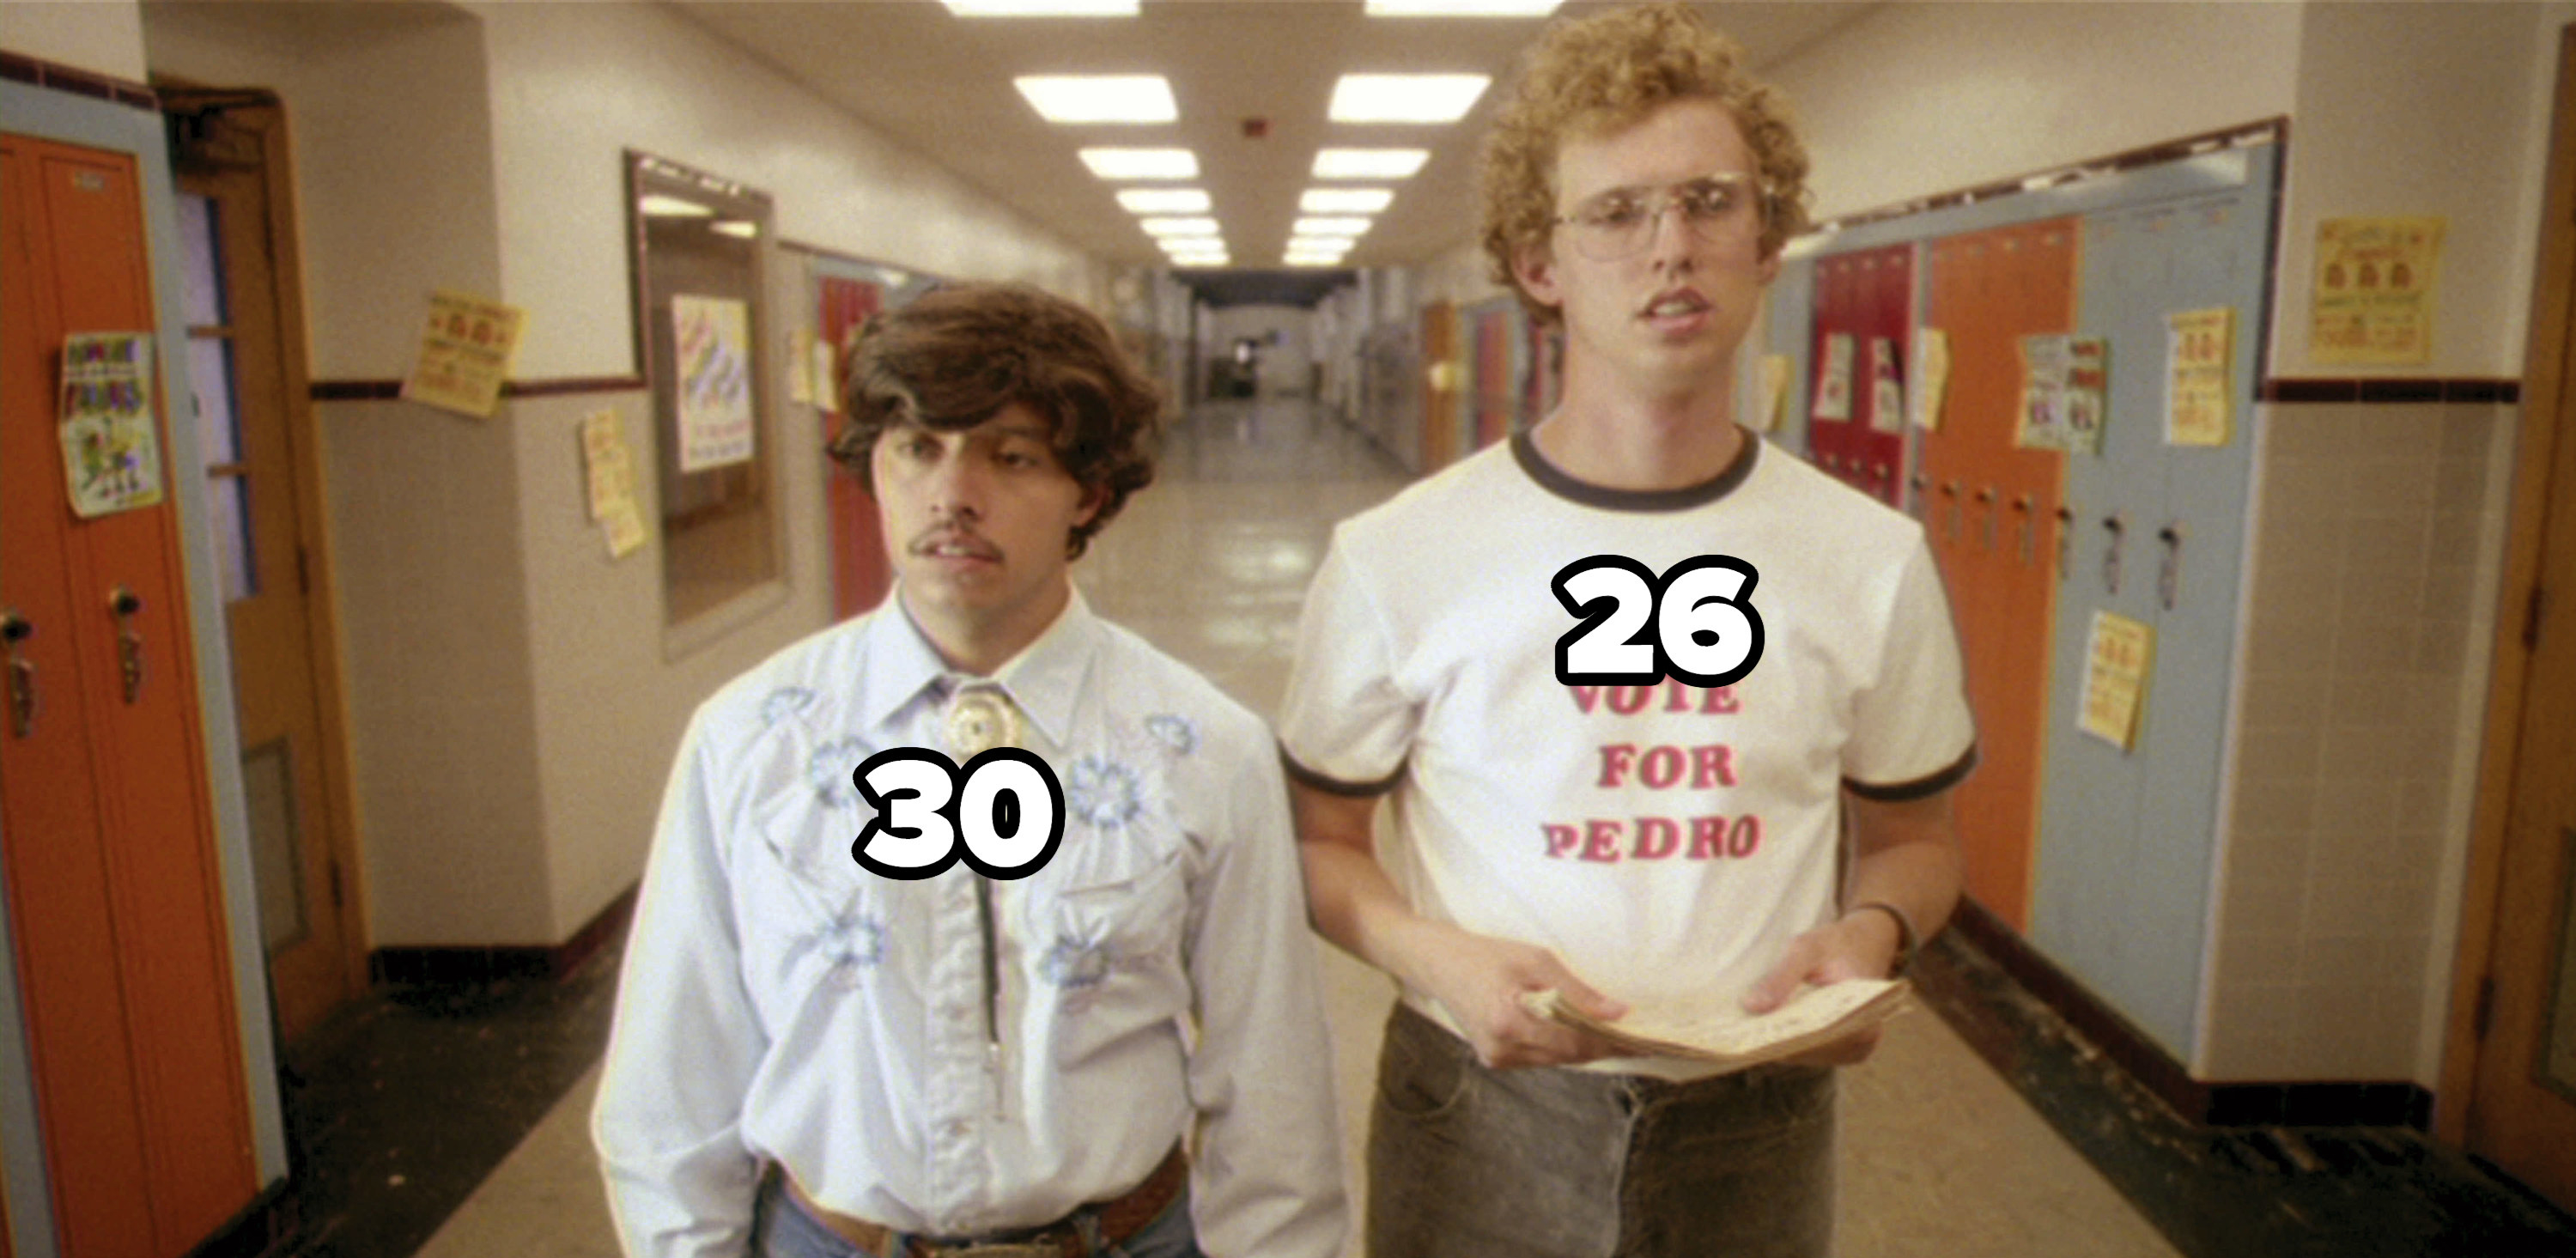 Pedro labeled 30 and Napoleon labeled 26